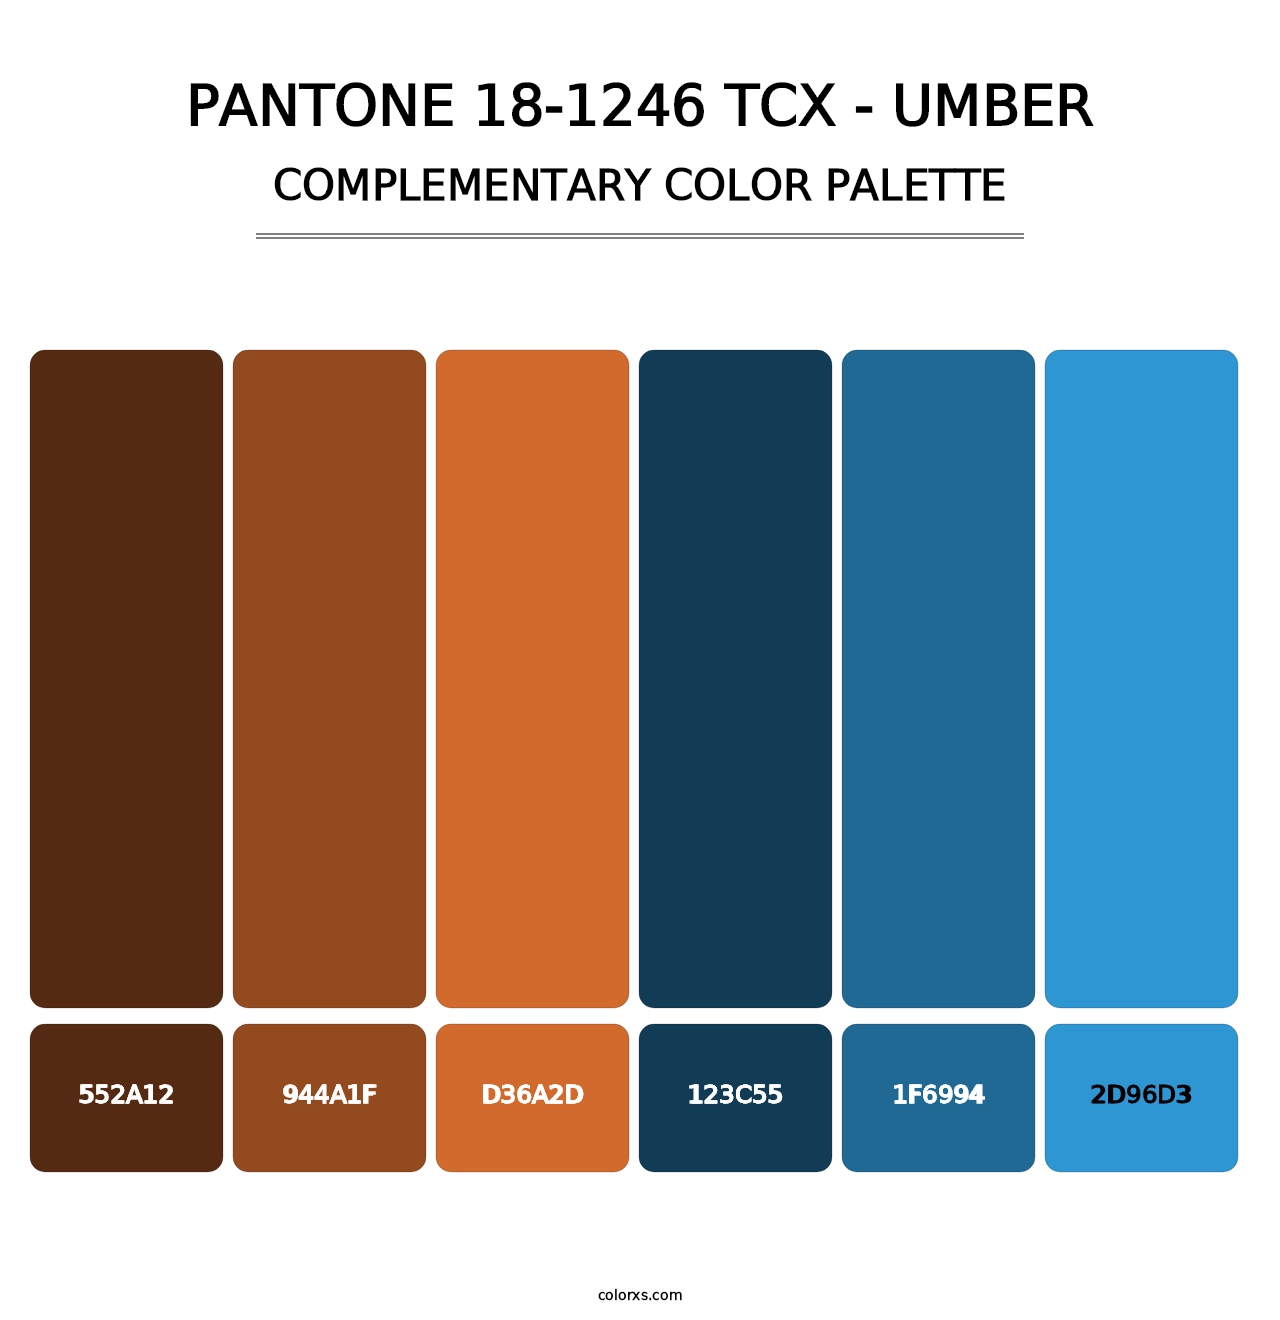 PANTONE 18-1246 TCX - Umber - Complementary Color Palette